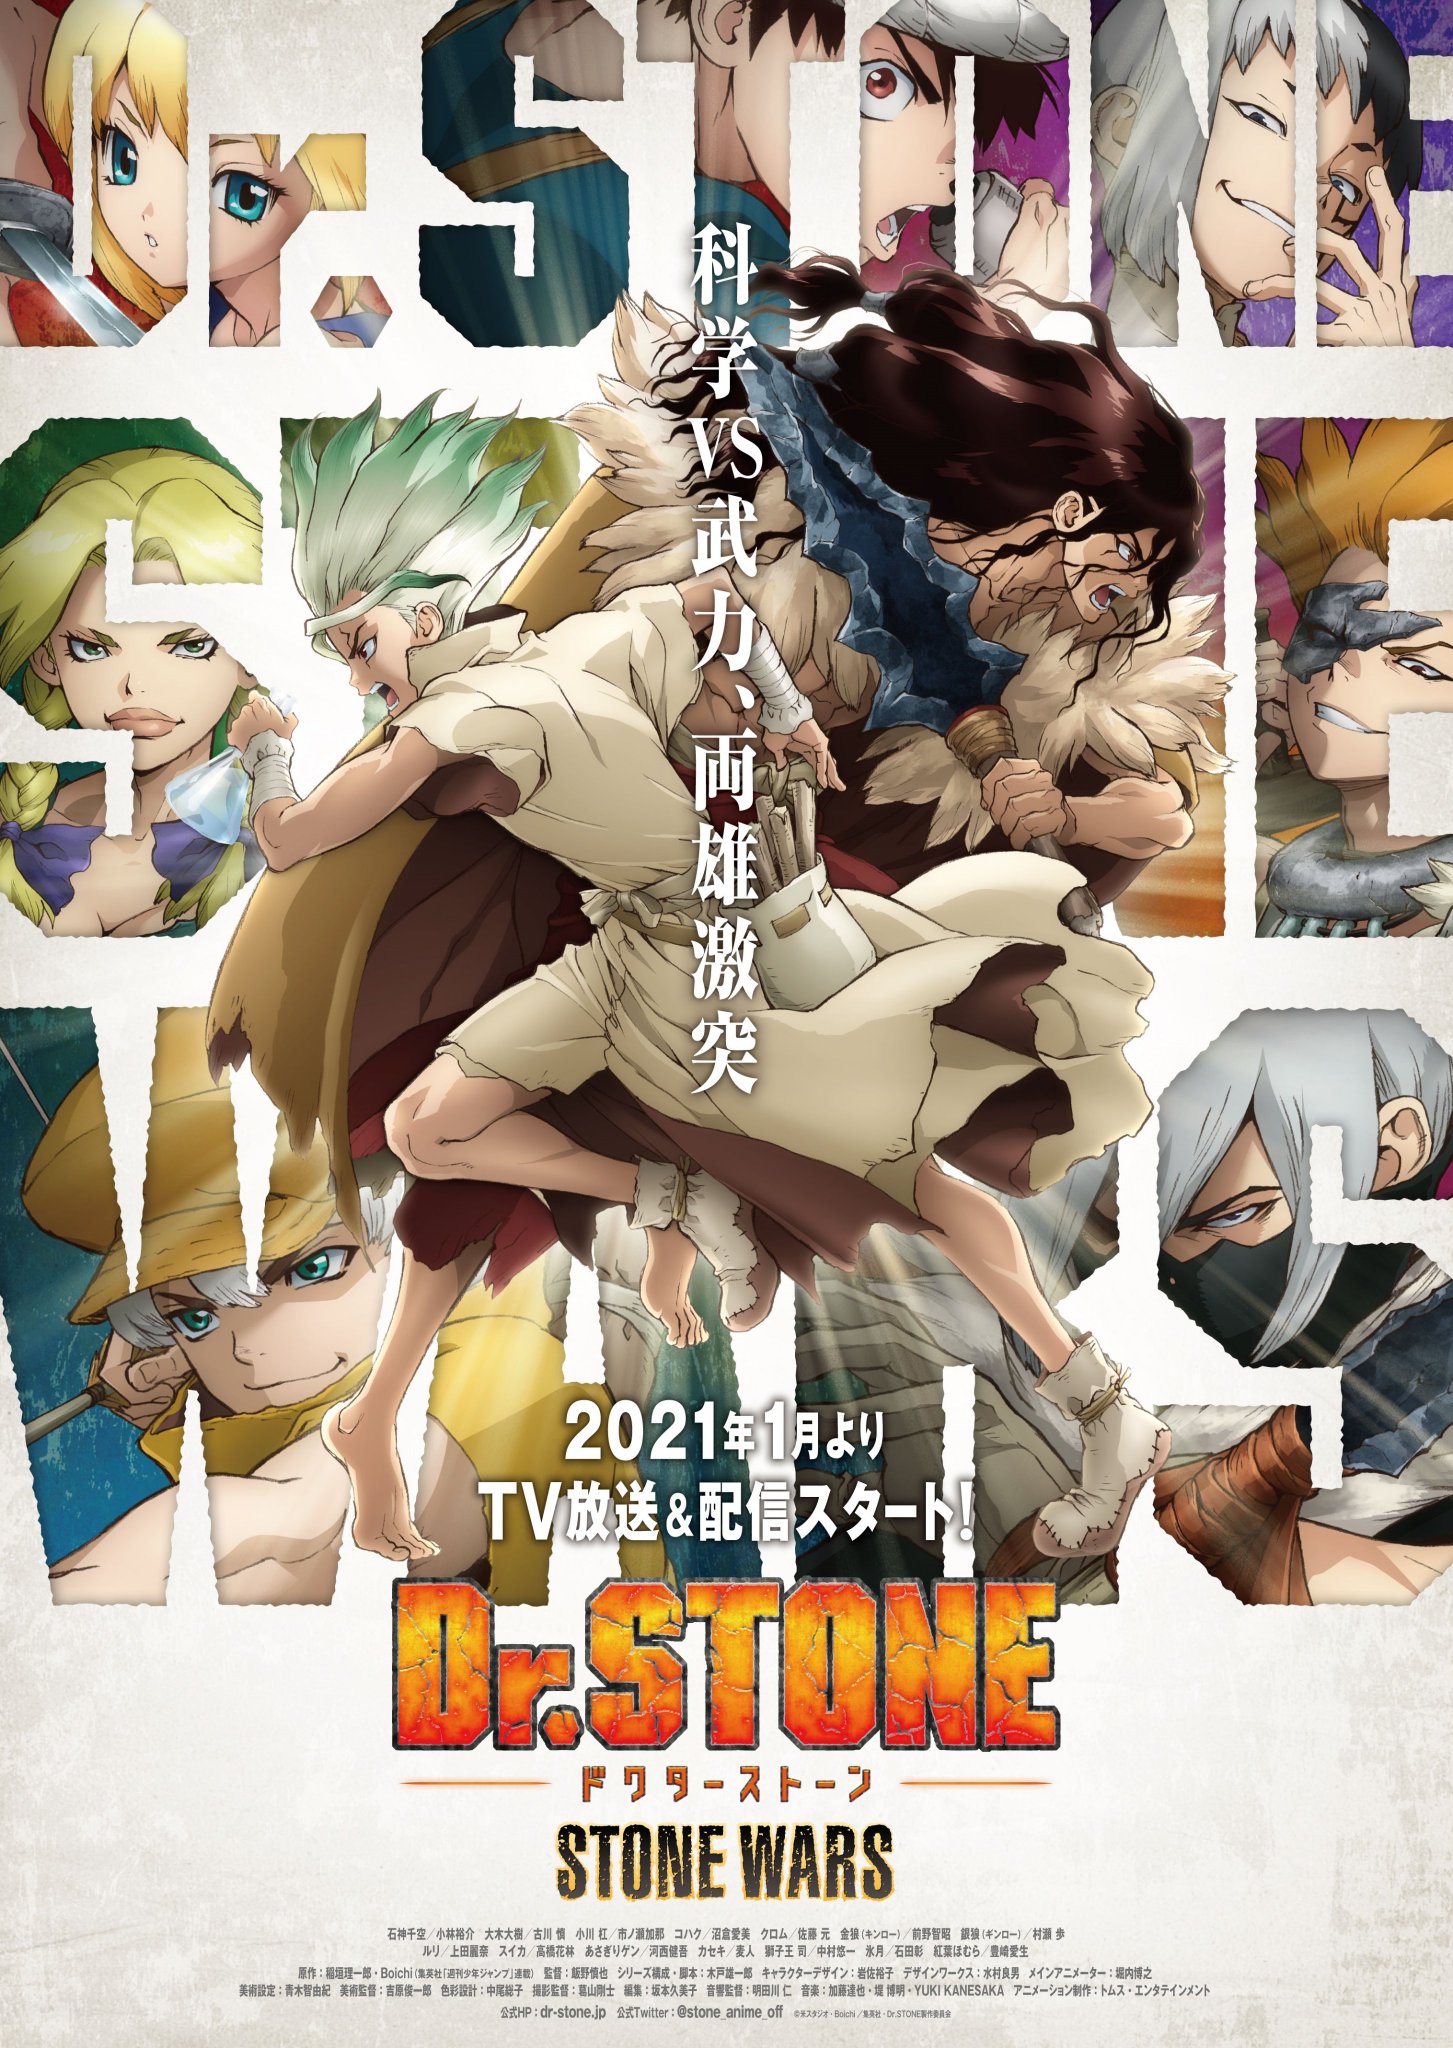 Dr Stone Stone Wars Will Premiere In January 21 Fire Force Season 2 To Be 24 Episodes Simulcast Begins Tomorrow Updated Toonami Faithful